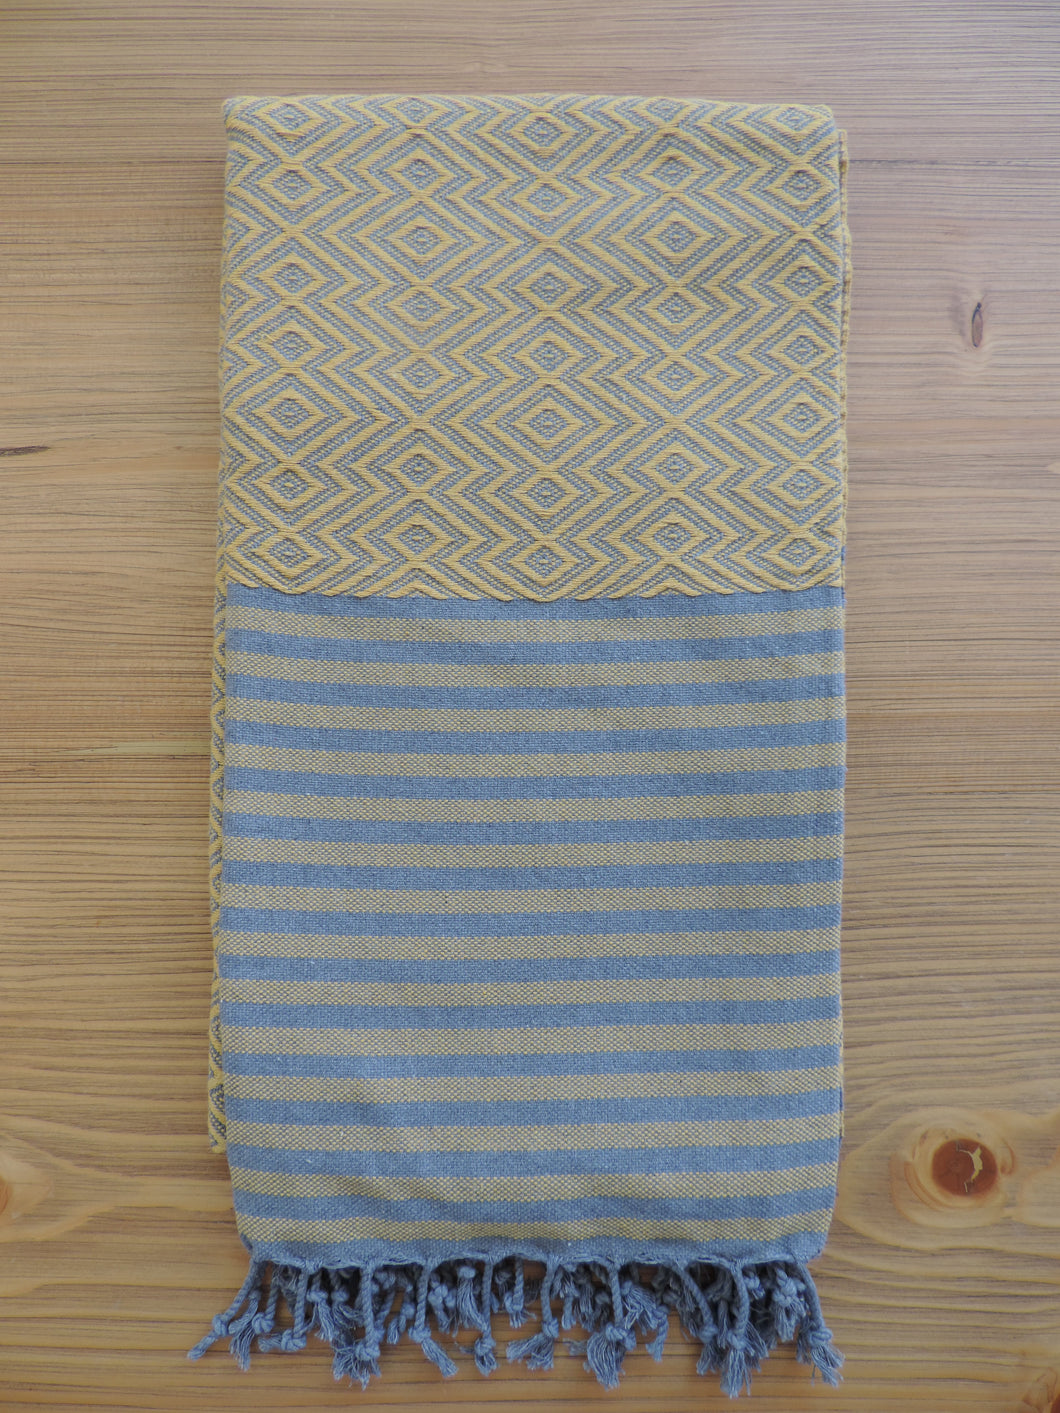 Personalized Blanket handmade in natural turkish organic cotton with mustard & grey stripes (1)